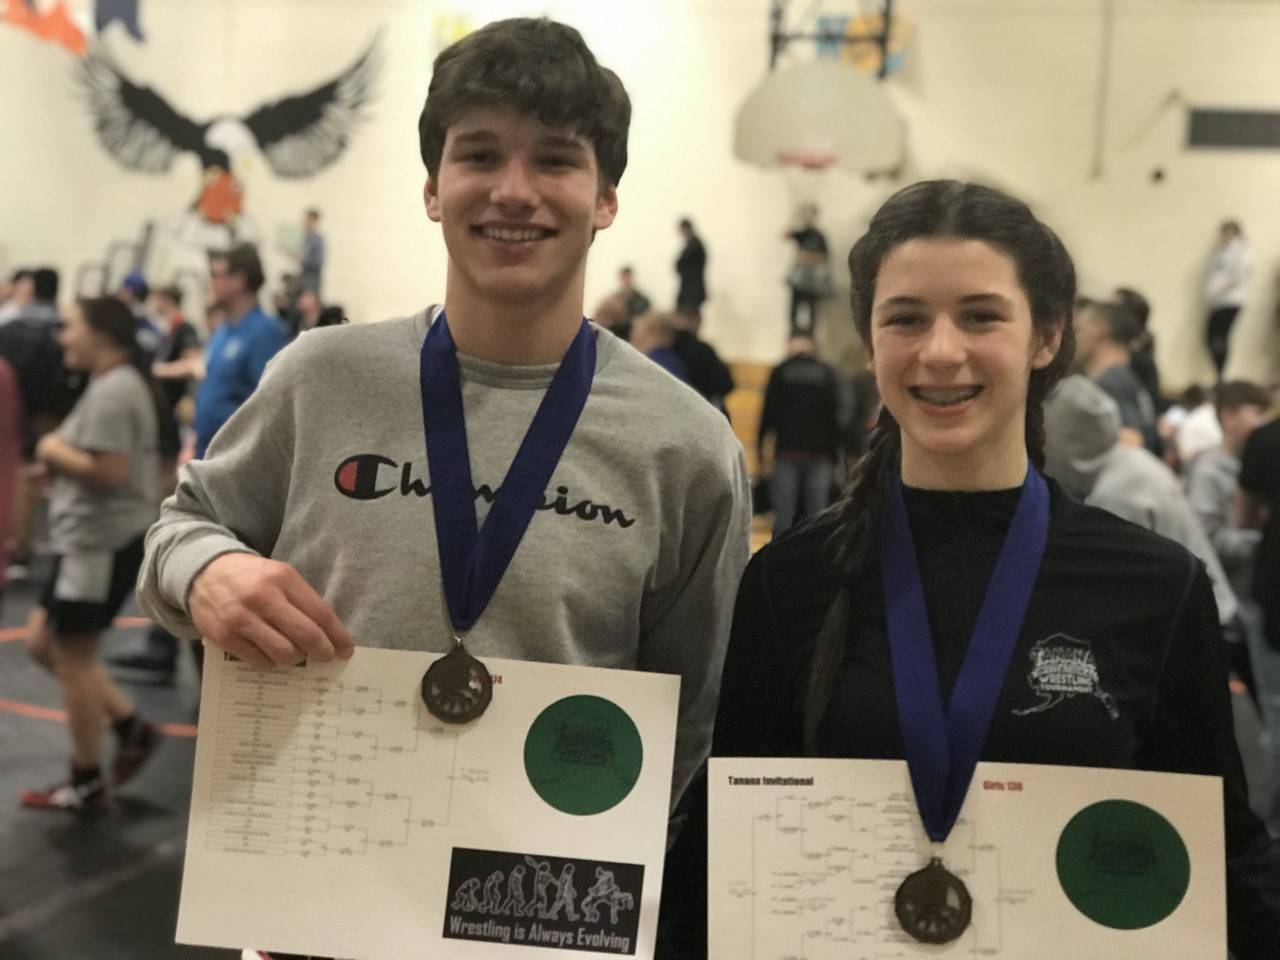 Left: Thomas Baxter, 174 pounds, and Evelyn Richard, 136 pounds, each won their divisions at the Middle School State Wrestling Championship in Fairbanks.